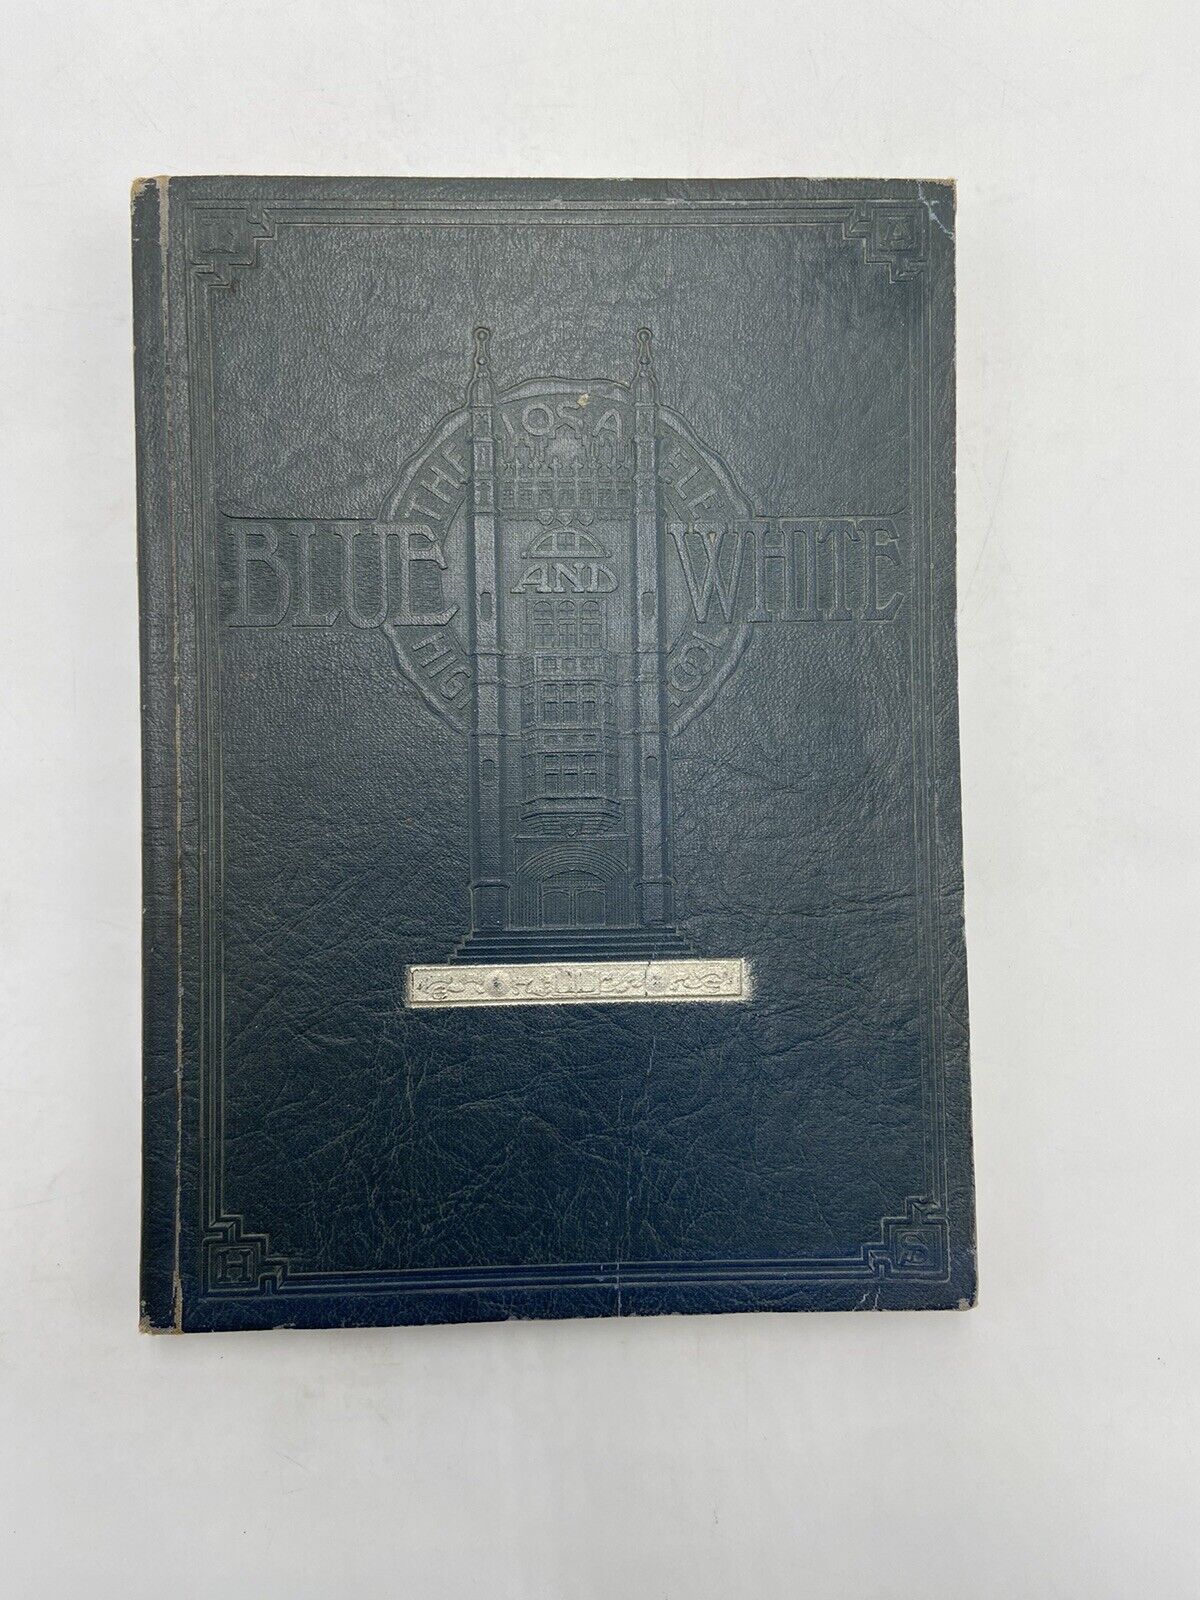 1930 LOS ANGELES HIGH SCHOOL BLUE AND WHITE YEARBOOK